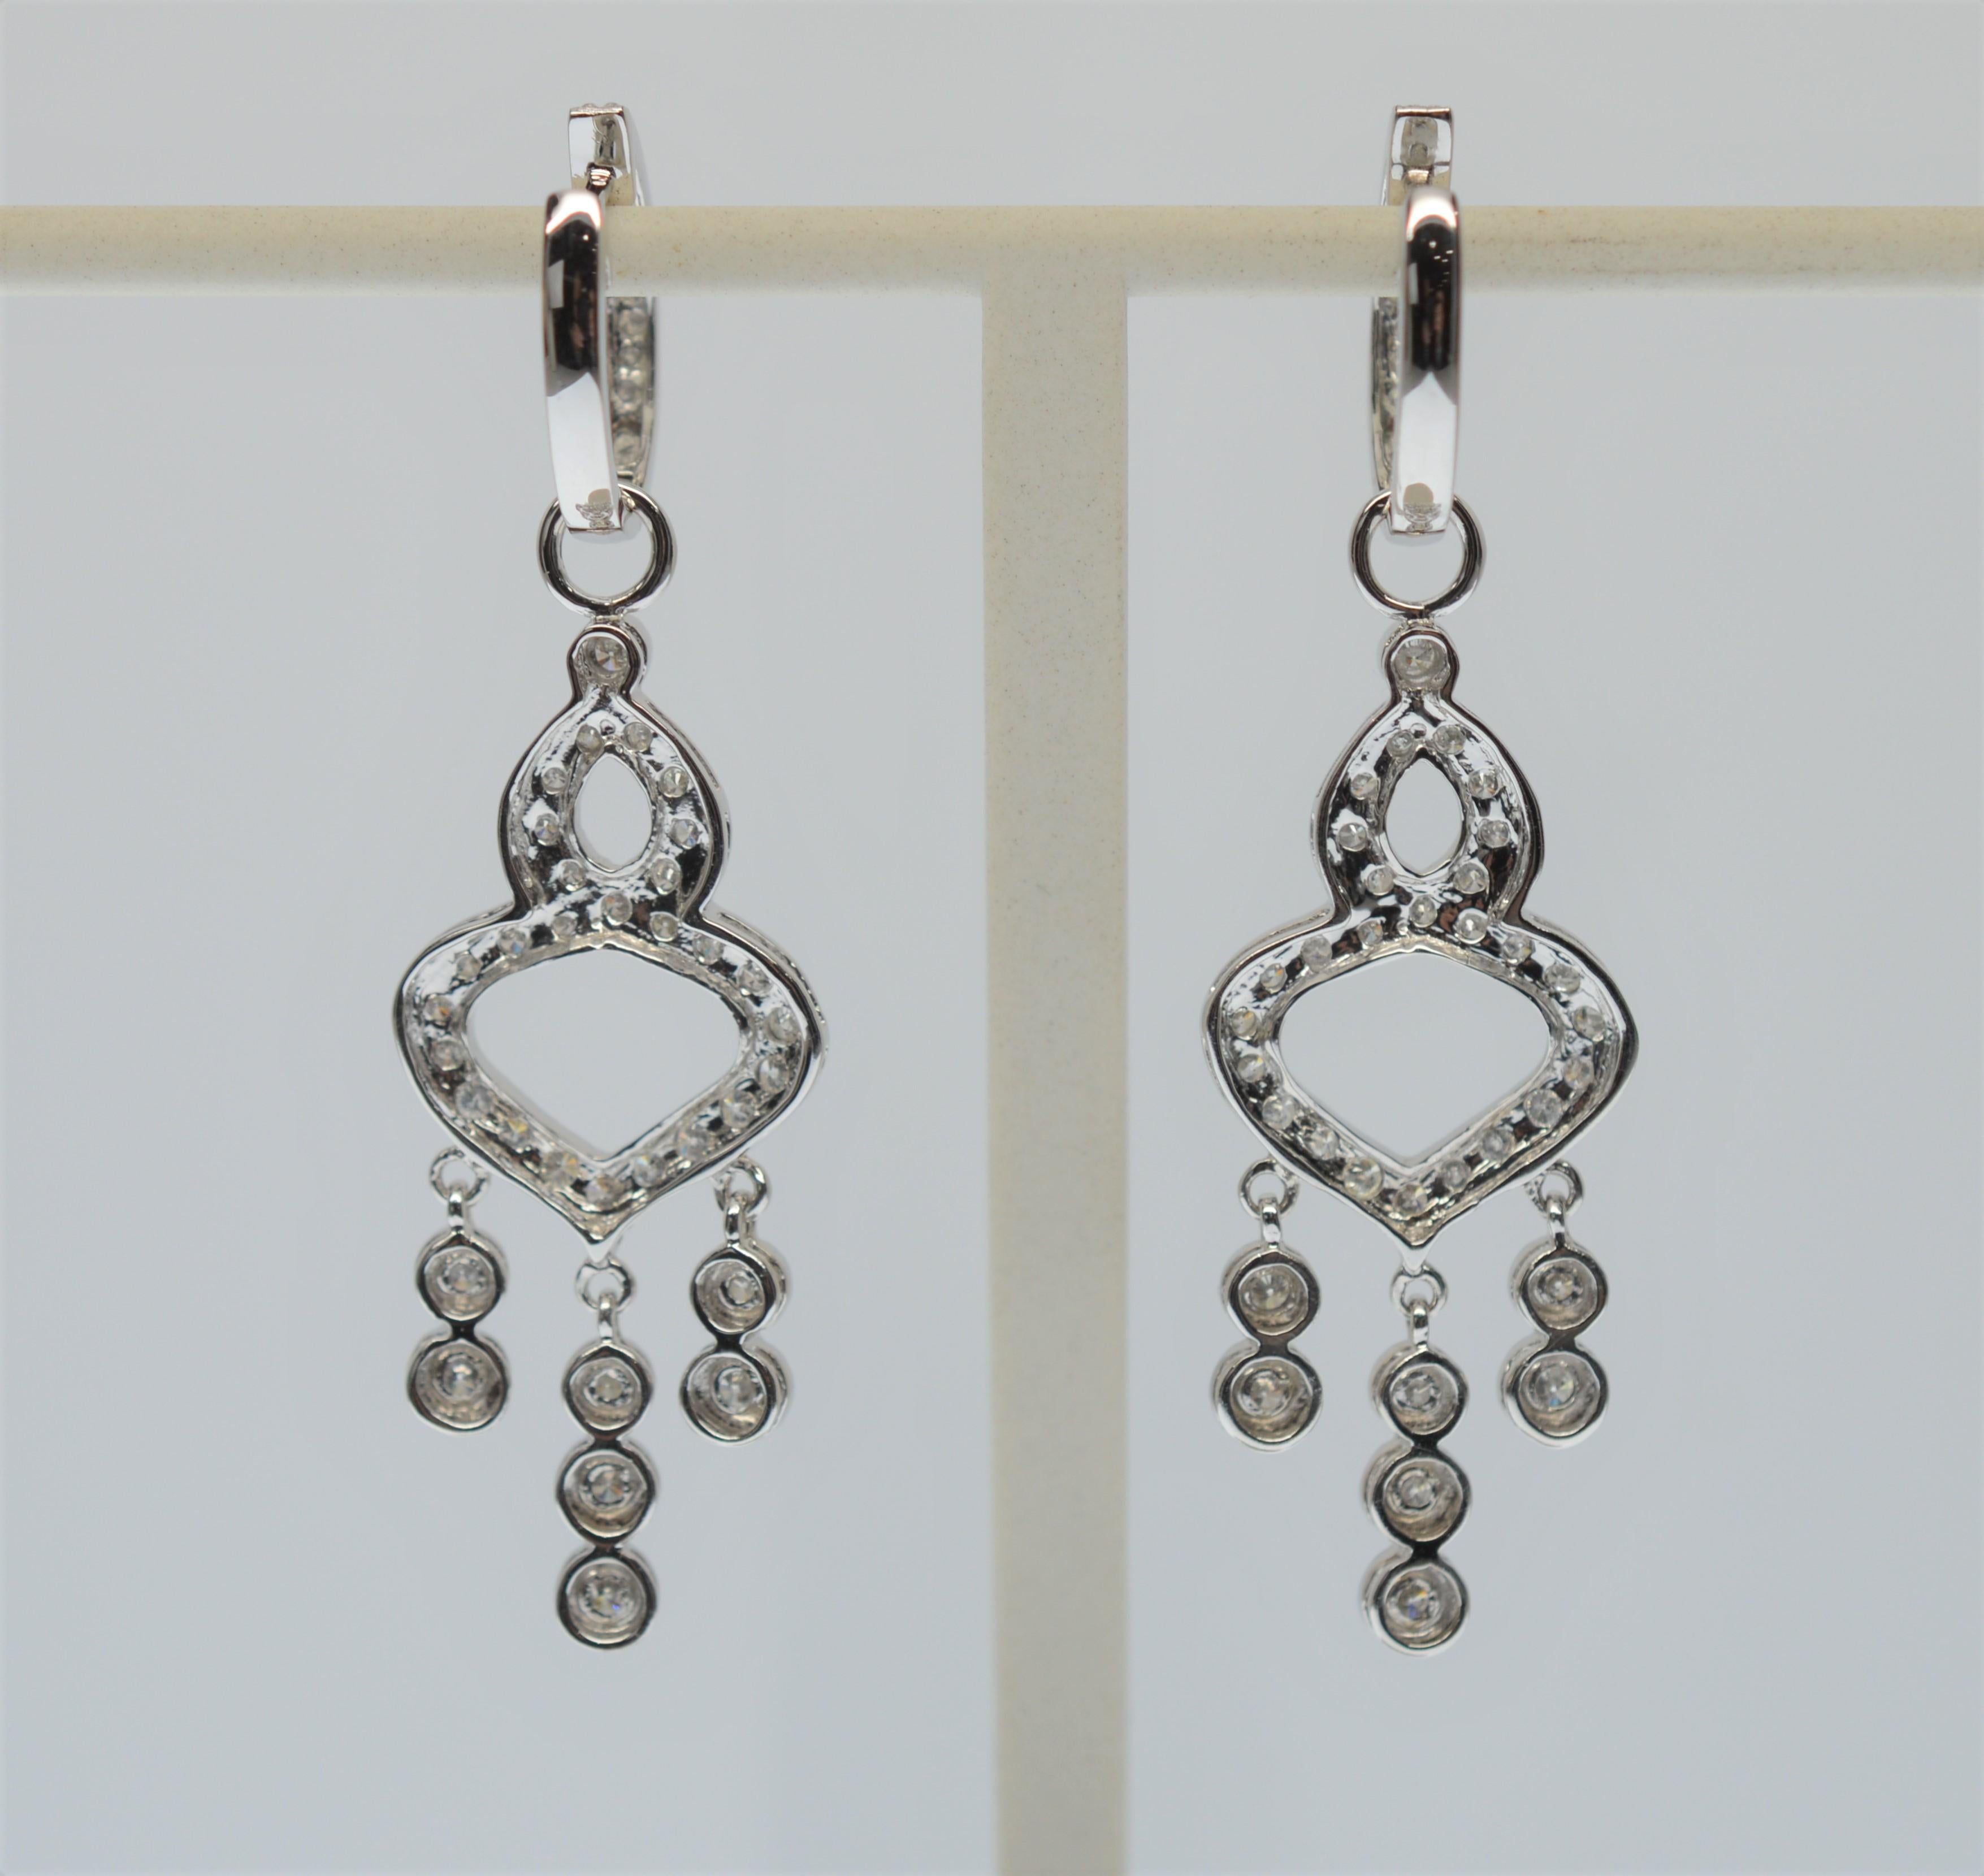 Fancy 14k White Gold & Diamond Chandelier Earrings with huggie- style closure. Total length 2 inches, drop from closure is 1-1/2 inches. 4.7 pennyweight .585 Gold. Total weight 4.9 pennyweight. In Gift Box. 